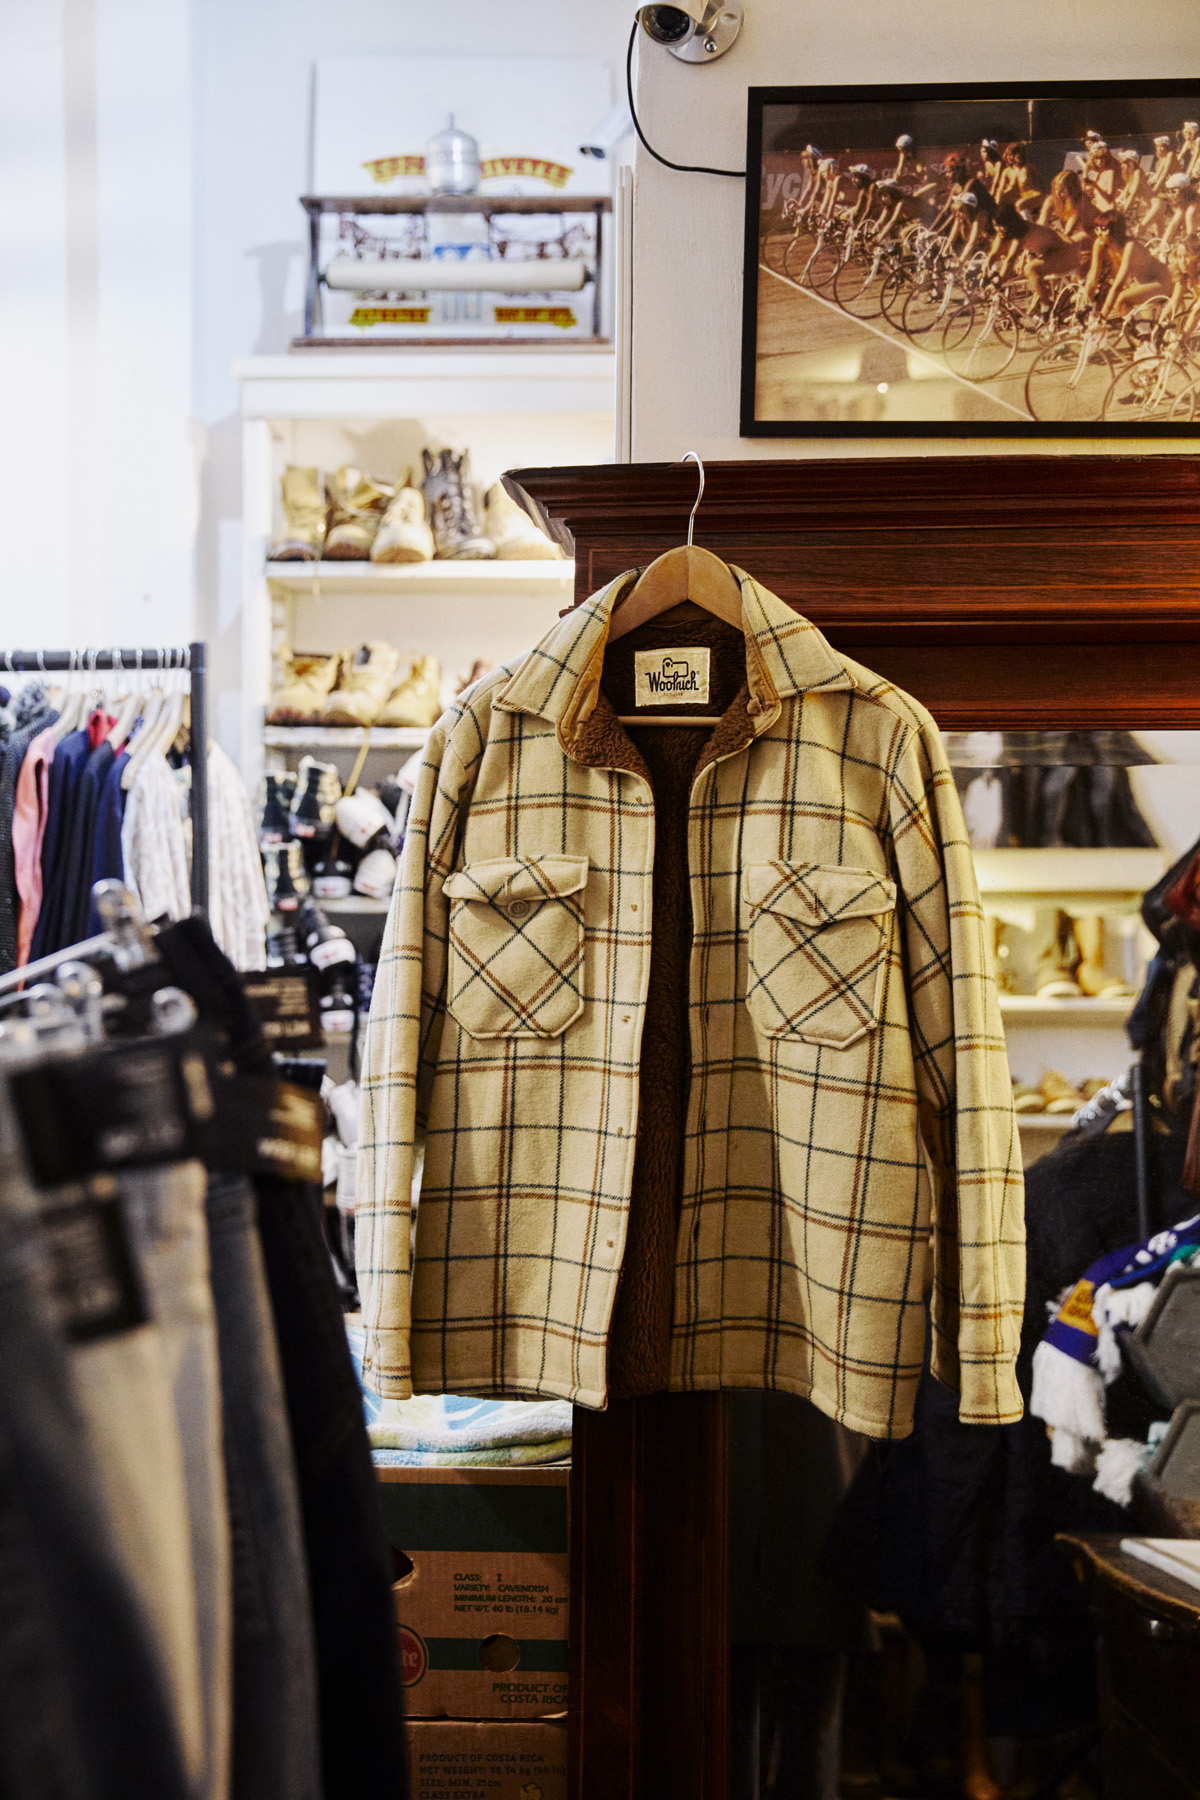 Our Search For the Best Vintage Woolrich Pieces in Berlin